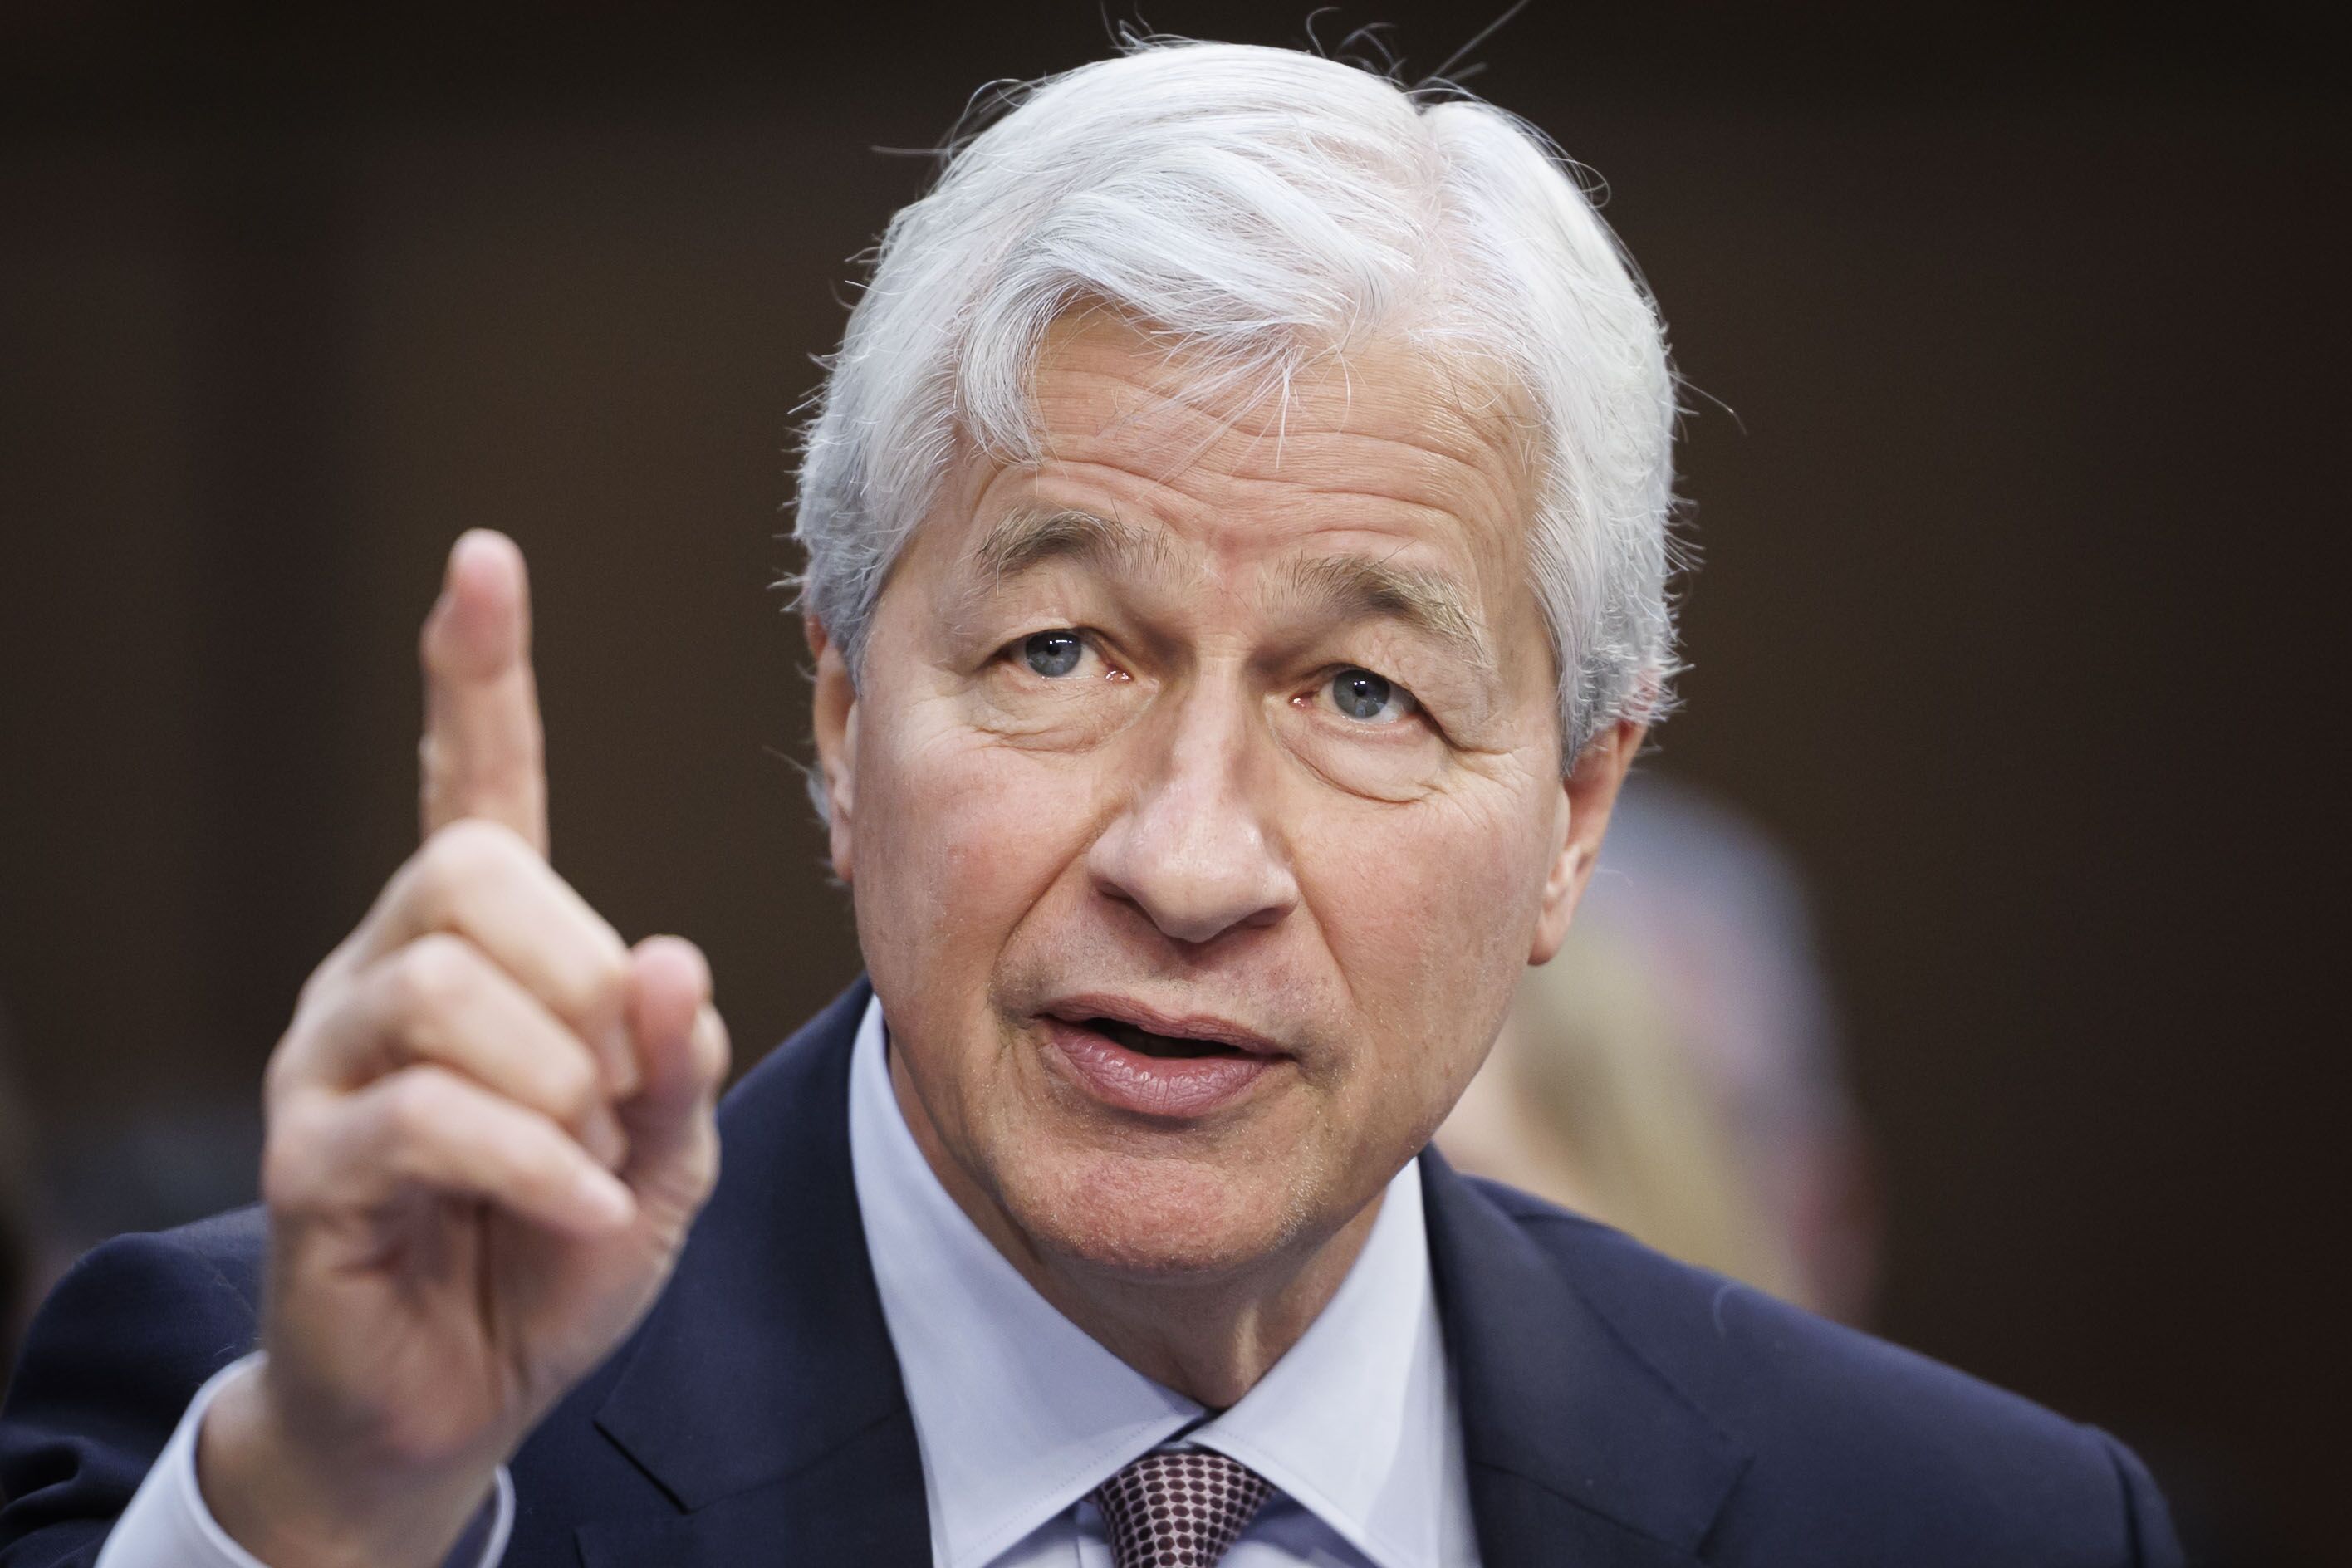 amazon, dimon contrasts texas business approach with nyc hostility